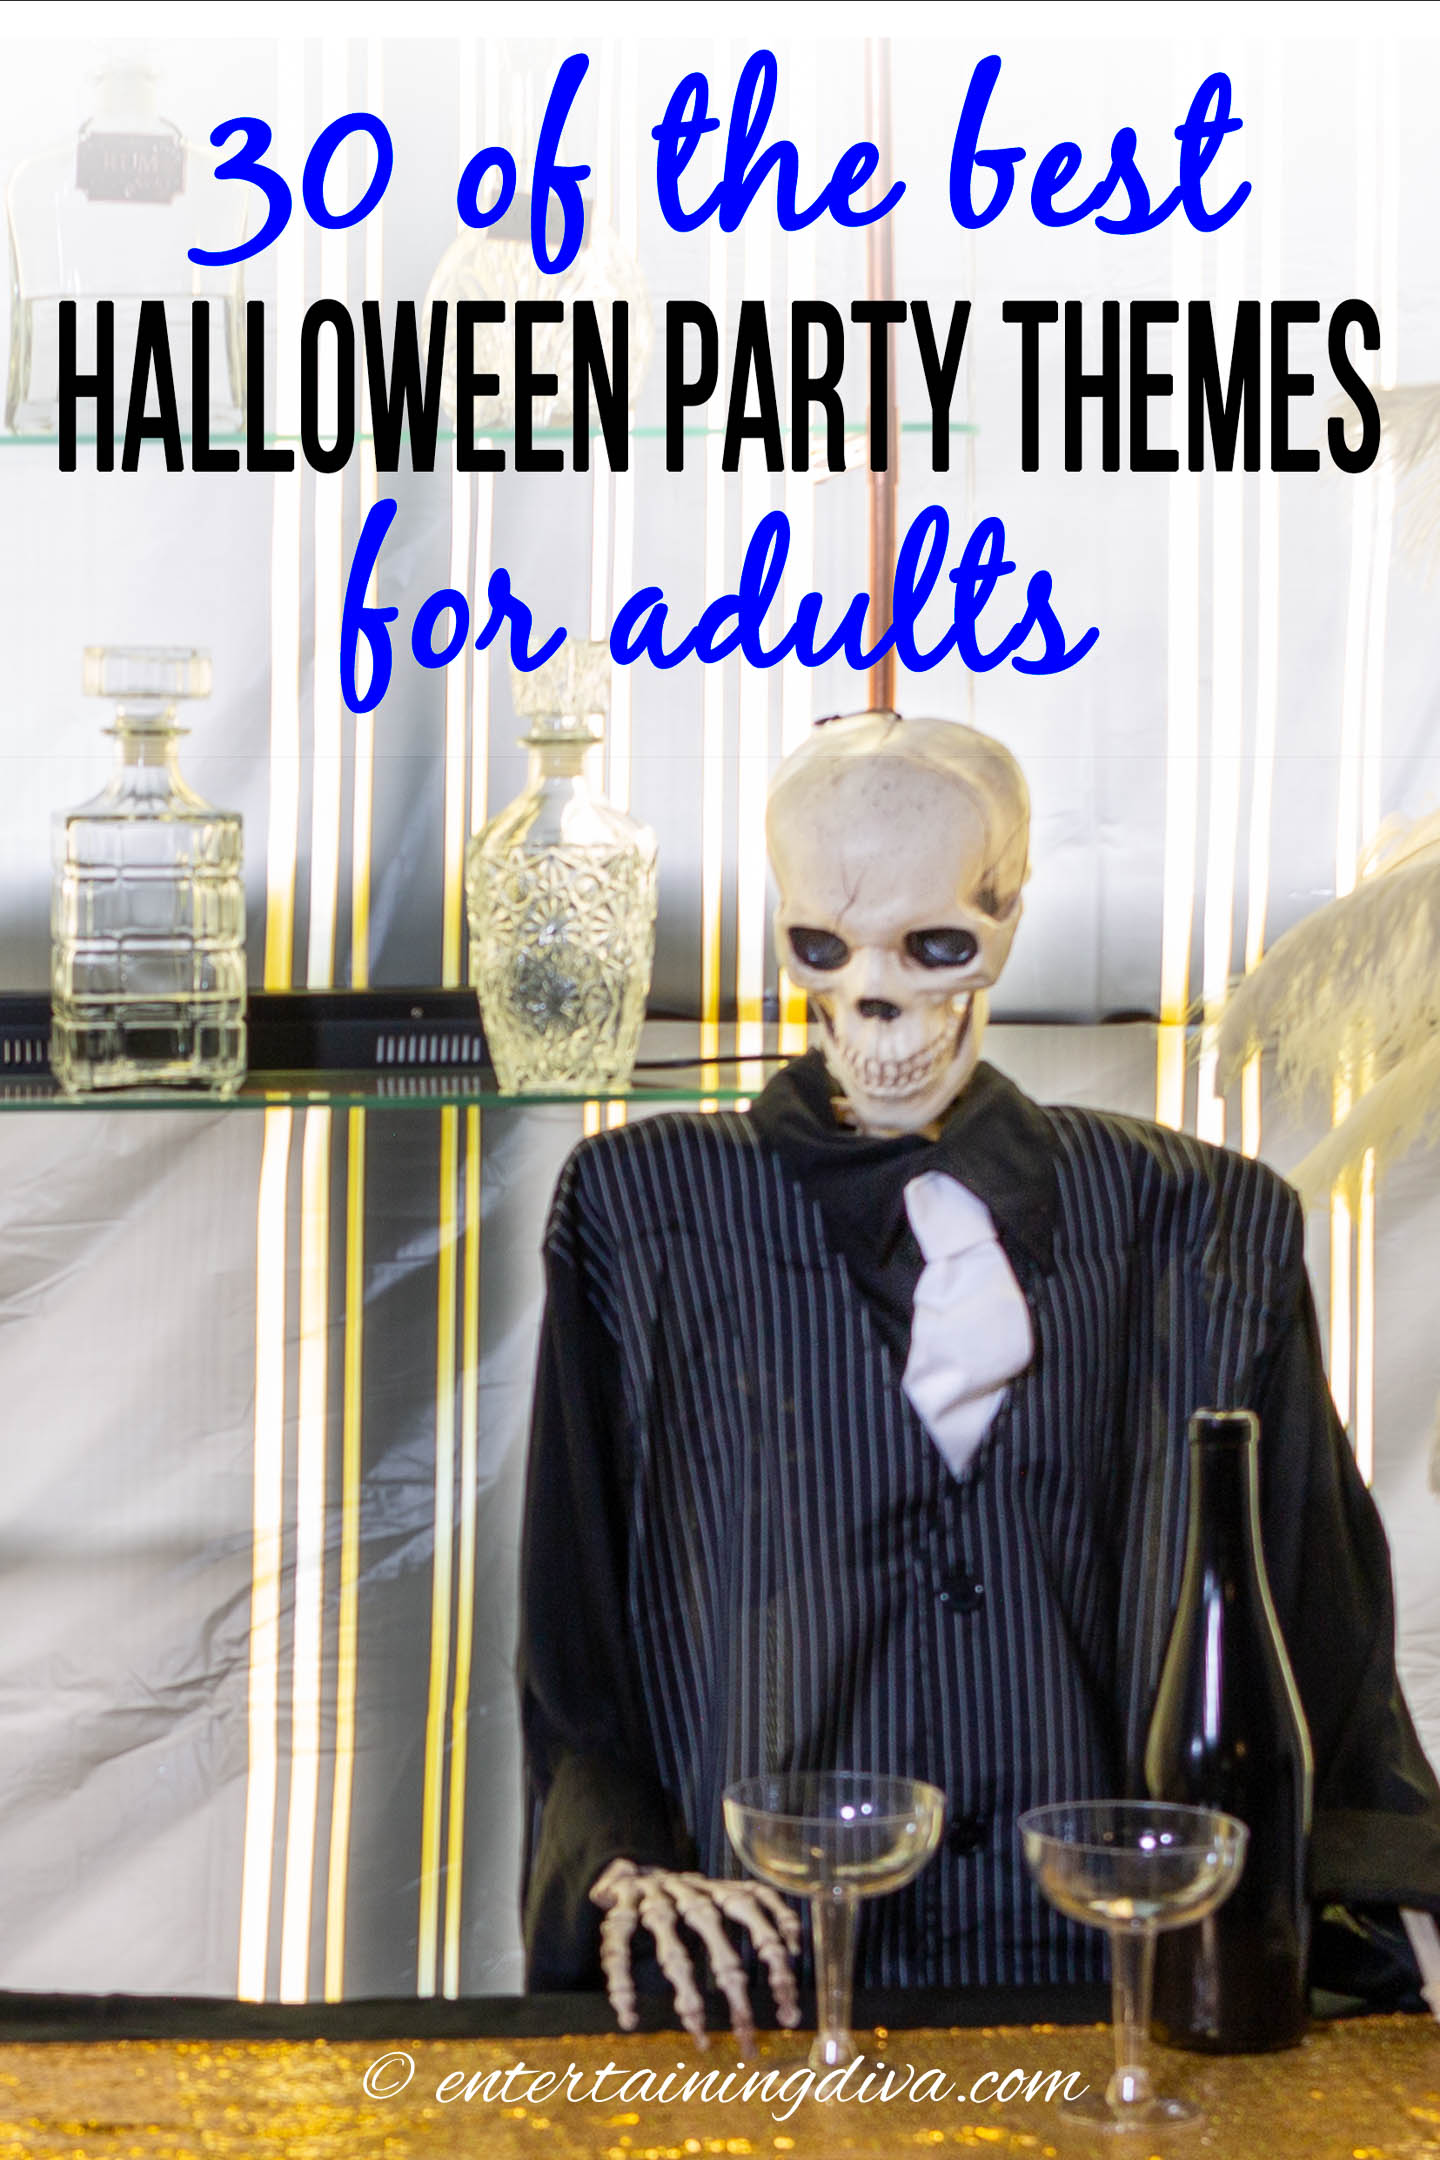 30 of the best Halloween party themes for adults